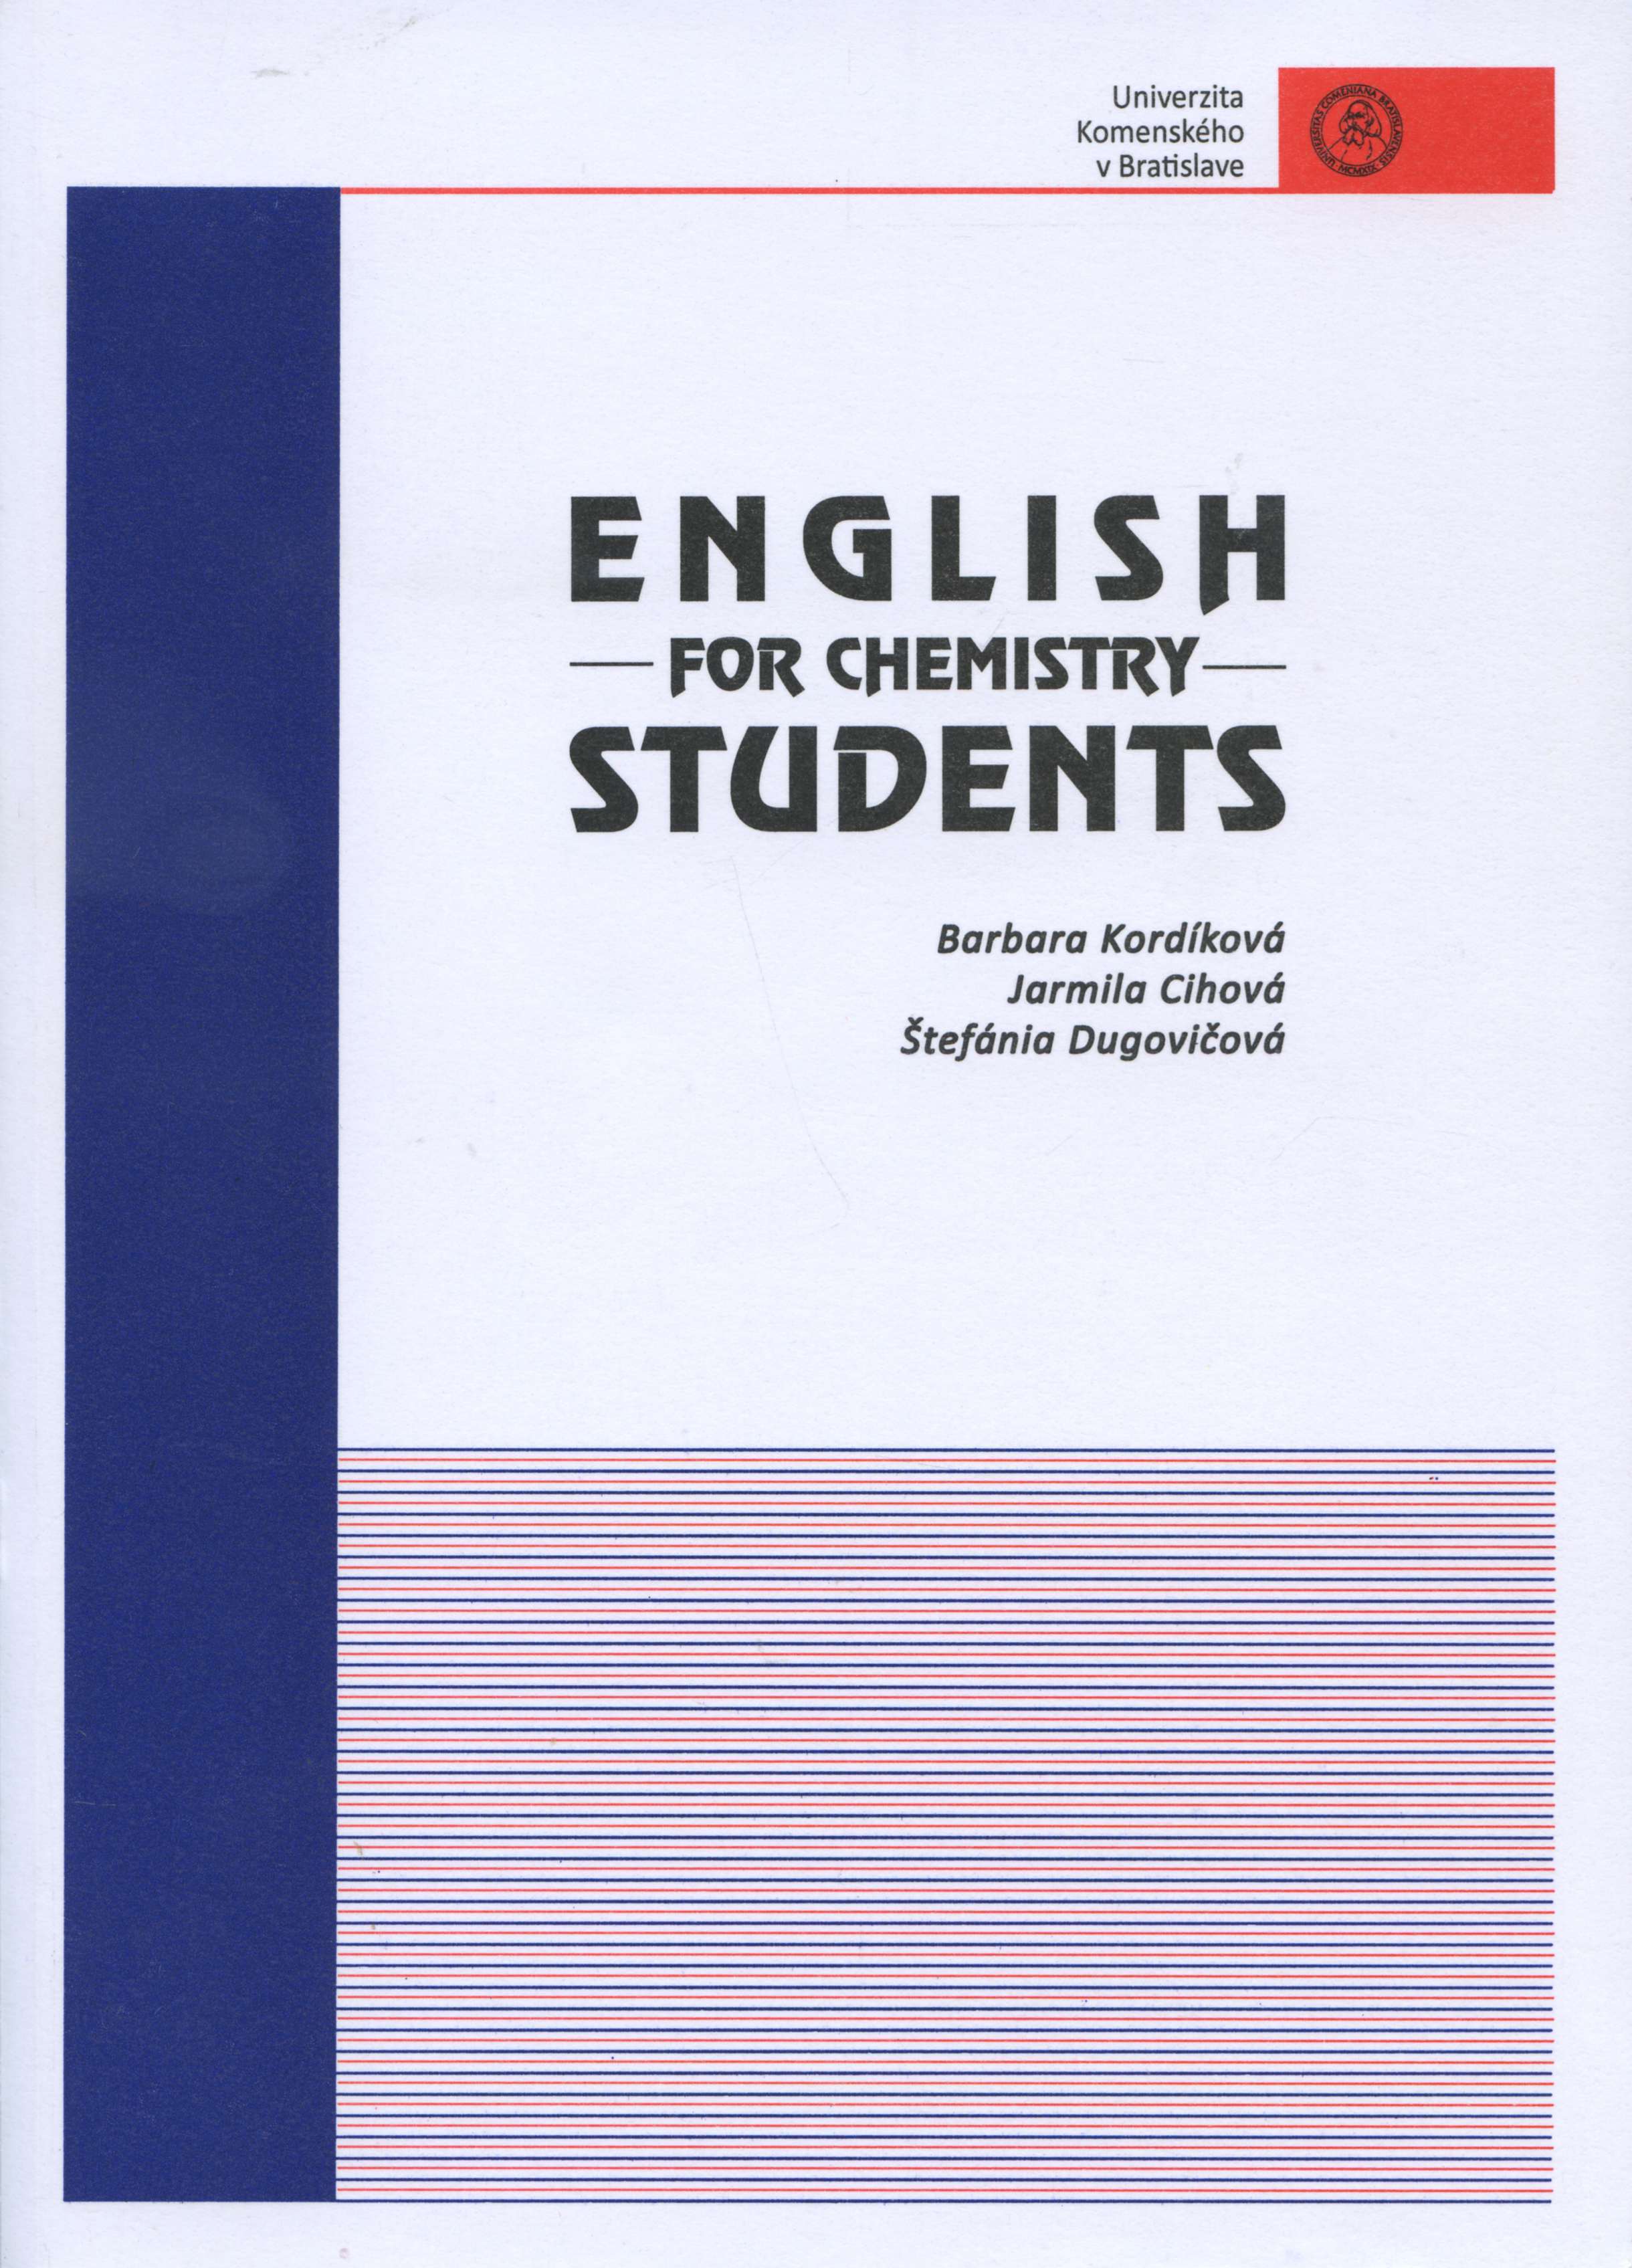 English for Chemistry Students